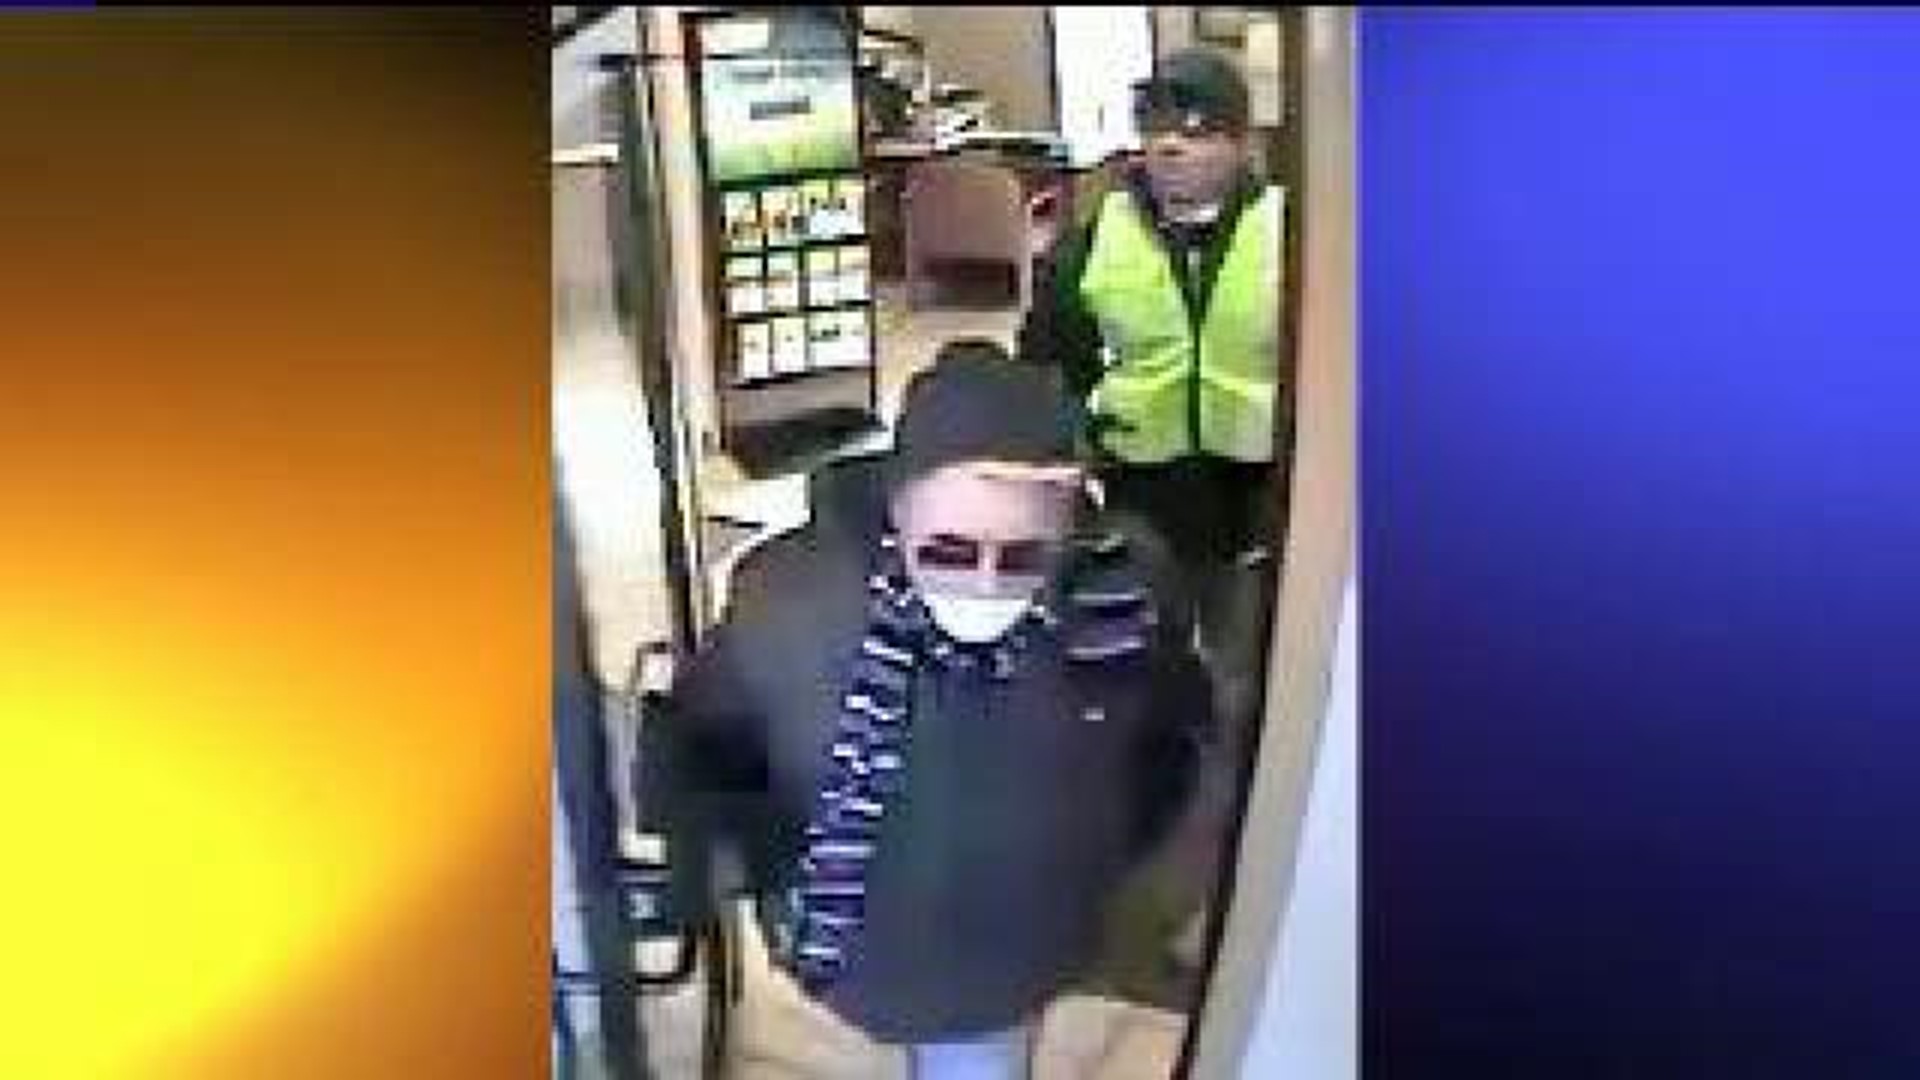 Security Images Of Bank Robbery Suspects, Getaway Vehicle Released